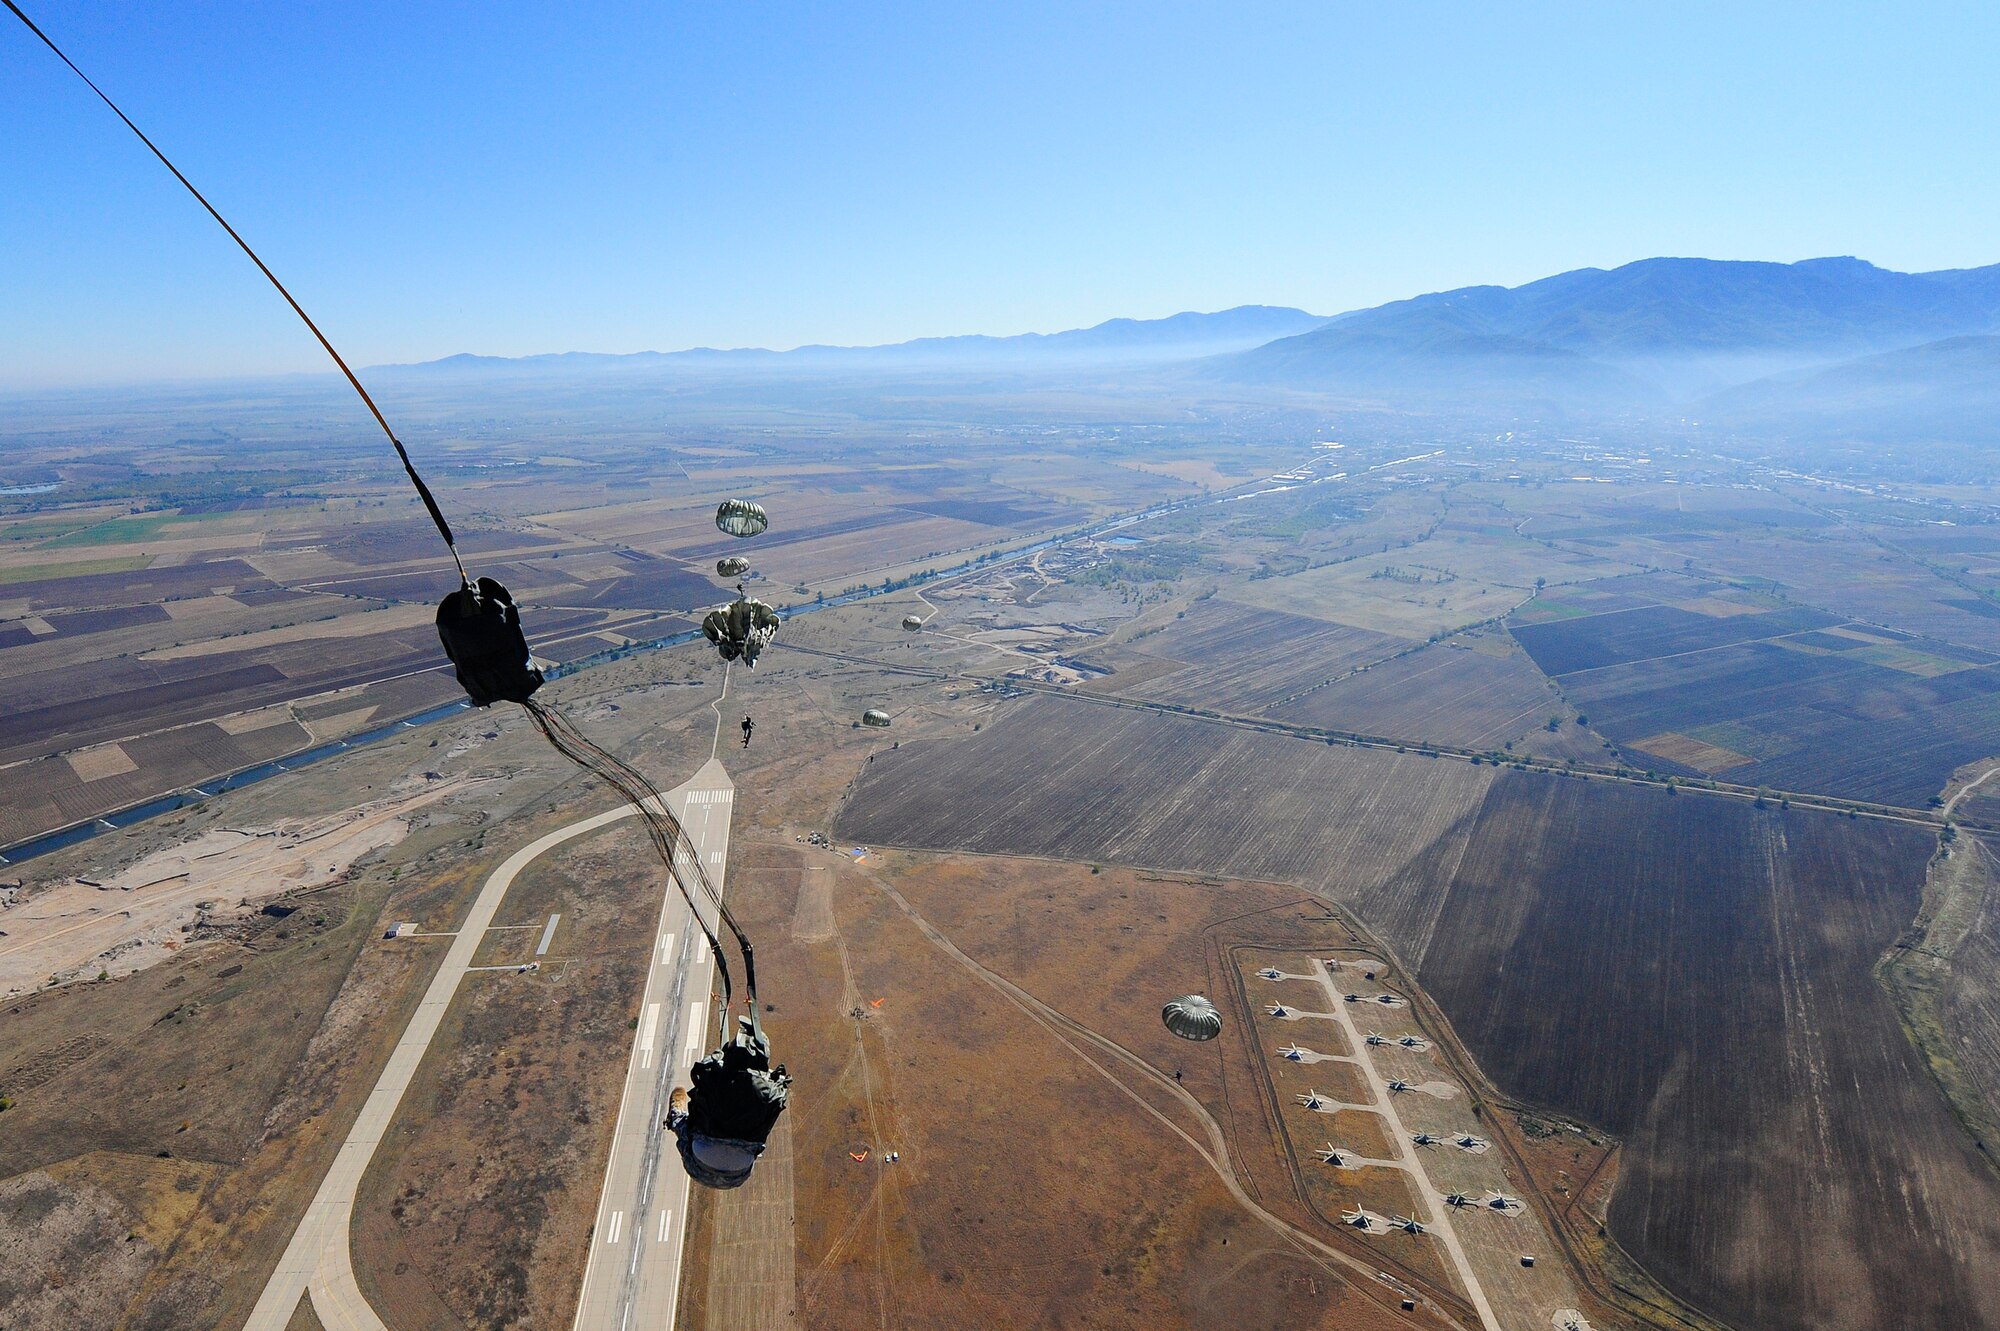 U.S. Army and Bulgarian air force paratroopers float to the ground after jumping from a C-130J Super Hercules aircraft during Operation Thracian Fall 2011, Oct. 19, 2011, Plovdiv, Bulgaria. OTF11 is off-station training designed to enhance interoperability between U.S. and Bulgarian Air Forces as well as build partnerships with paratroopers from both. (U.S. Air Force photo by Senior Airman Stephen J. Otero)